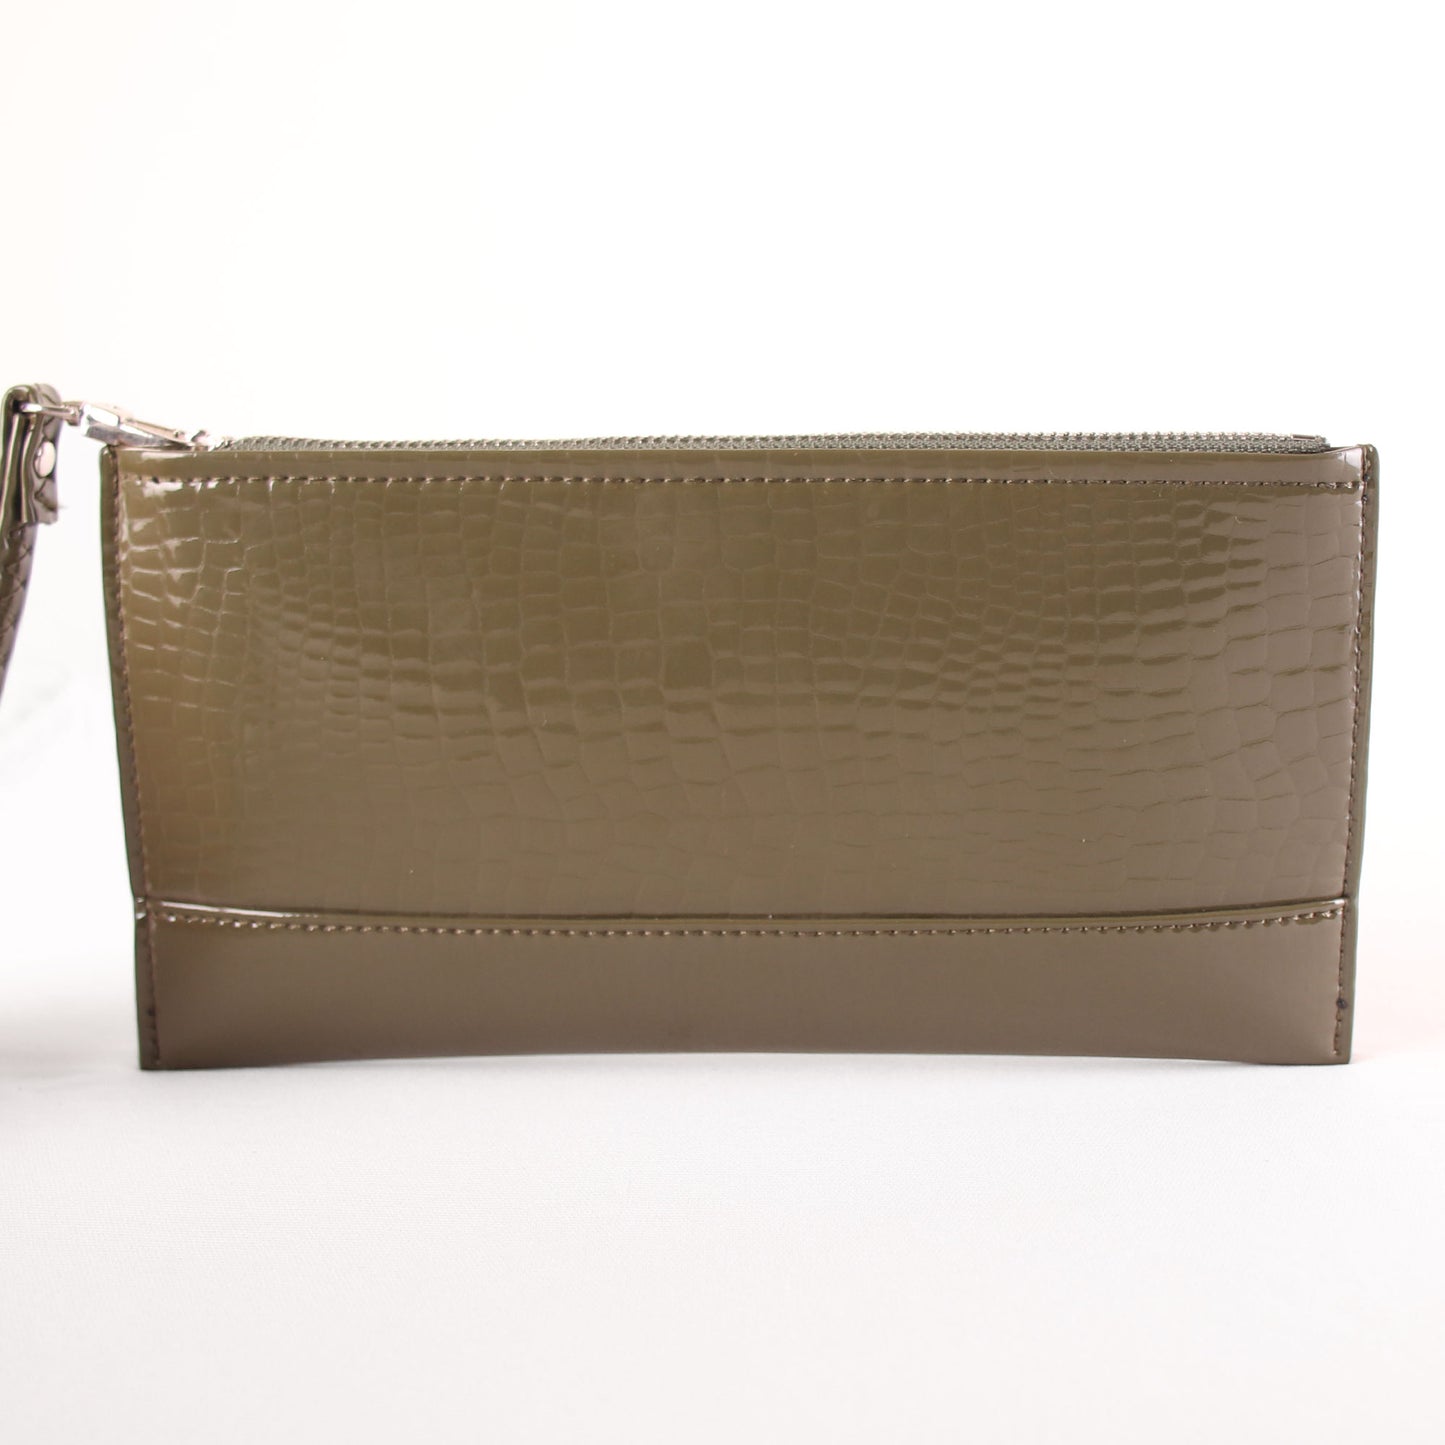 Wallet,The Squared Honeycomb Tassel Olive Green Wallet - Cippele Multi Store